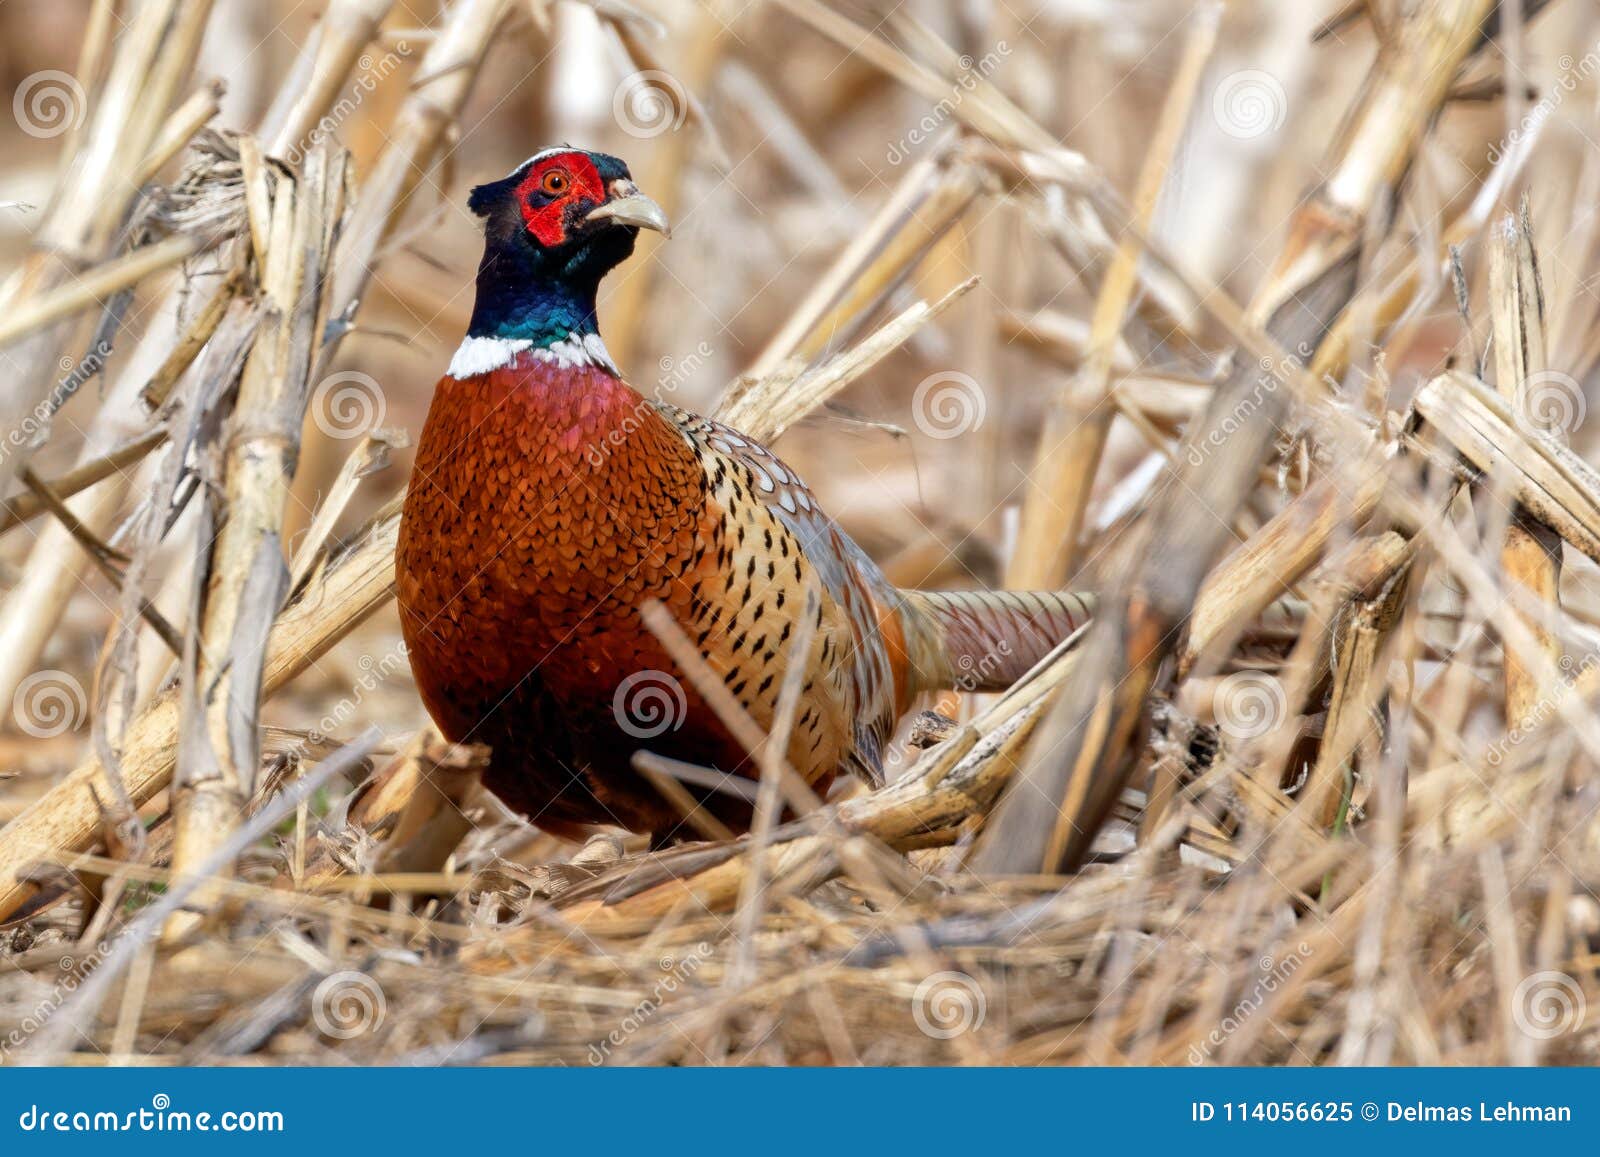 Are Pheasants for You?